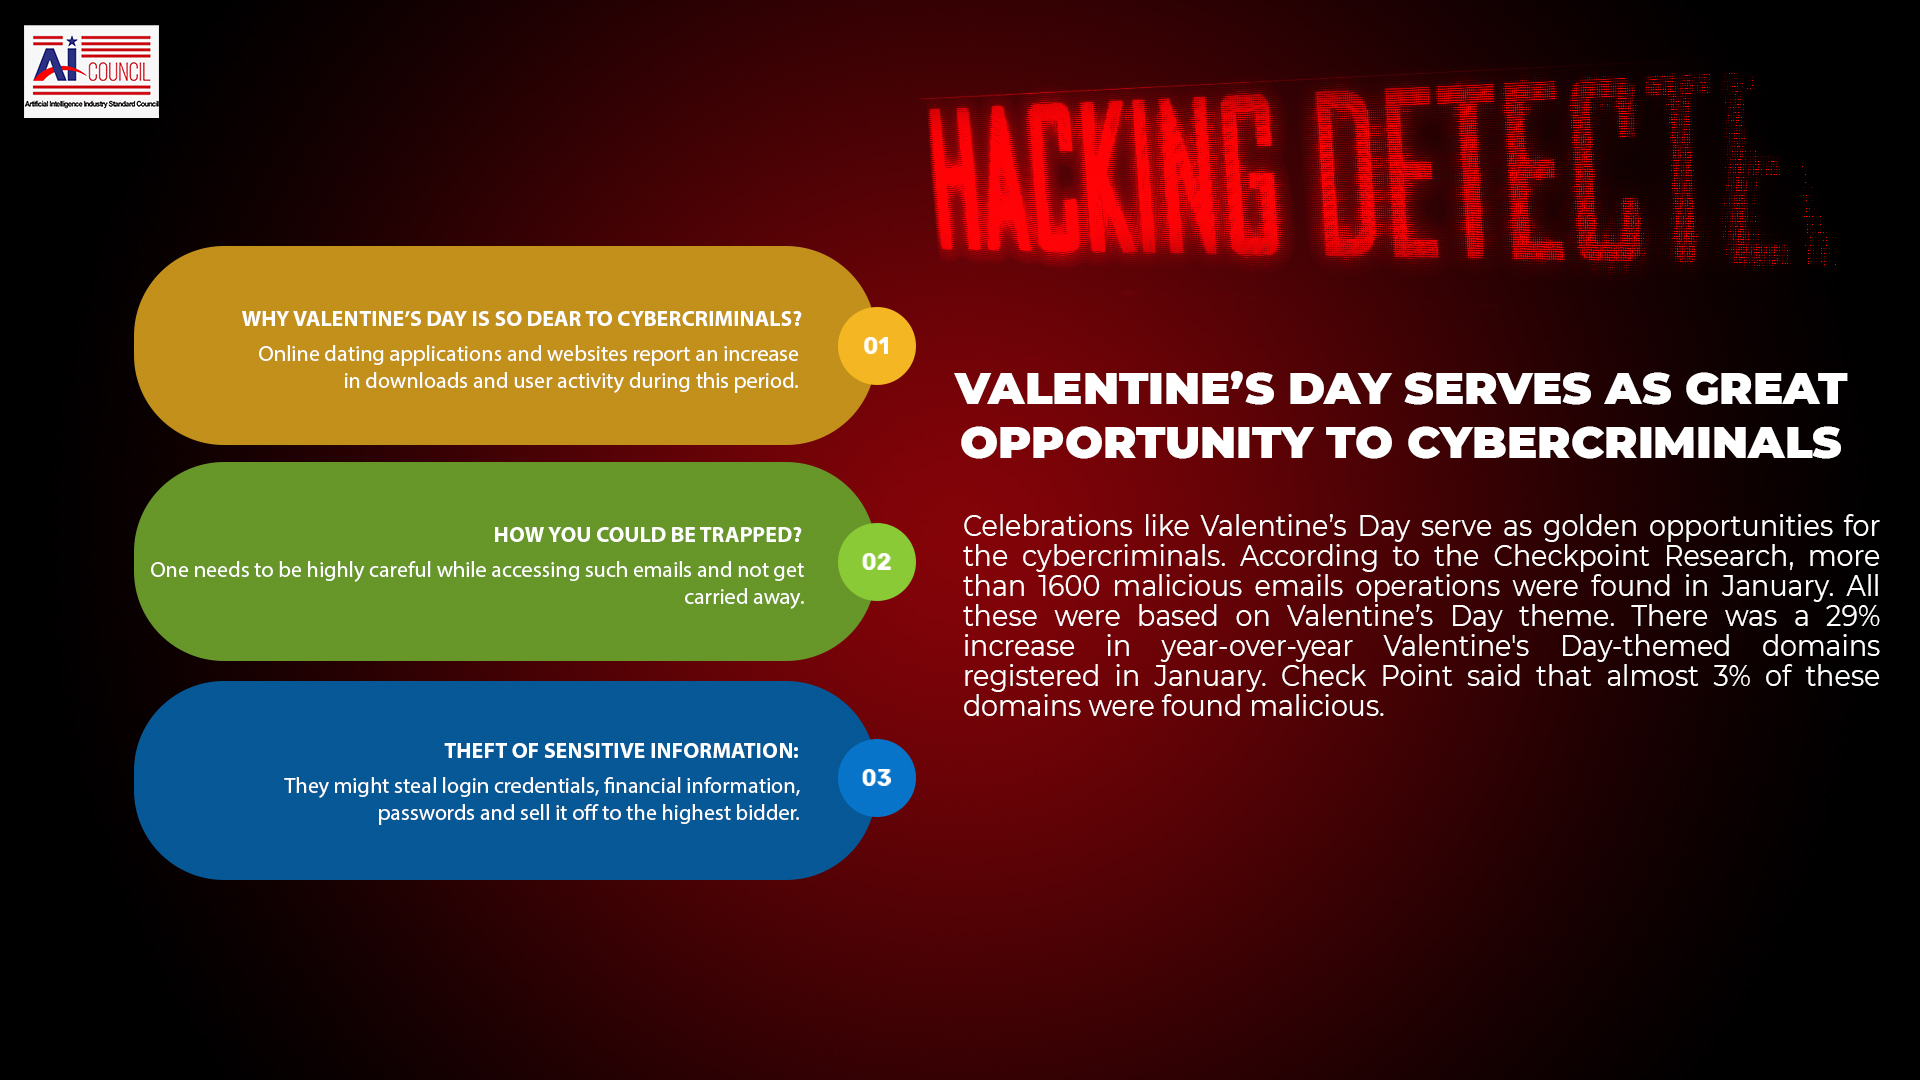 Valentine’s Day serves as Great Opportunity to Cybercriminals